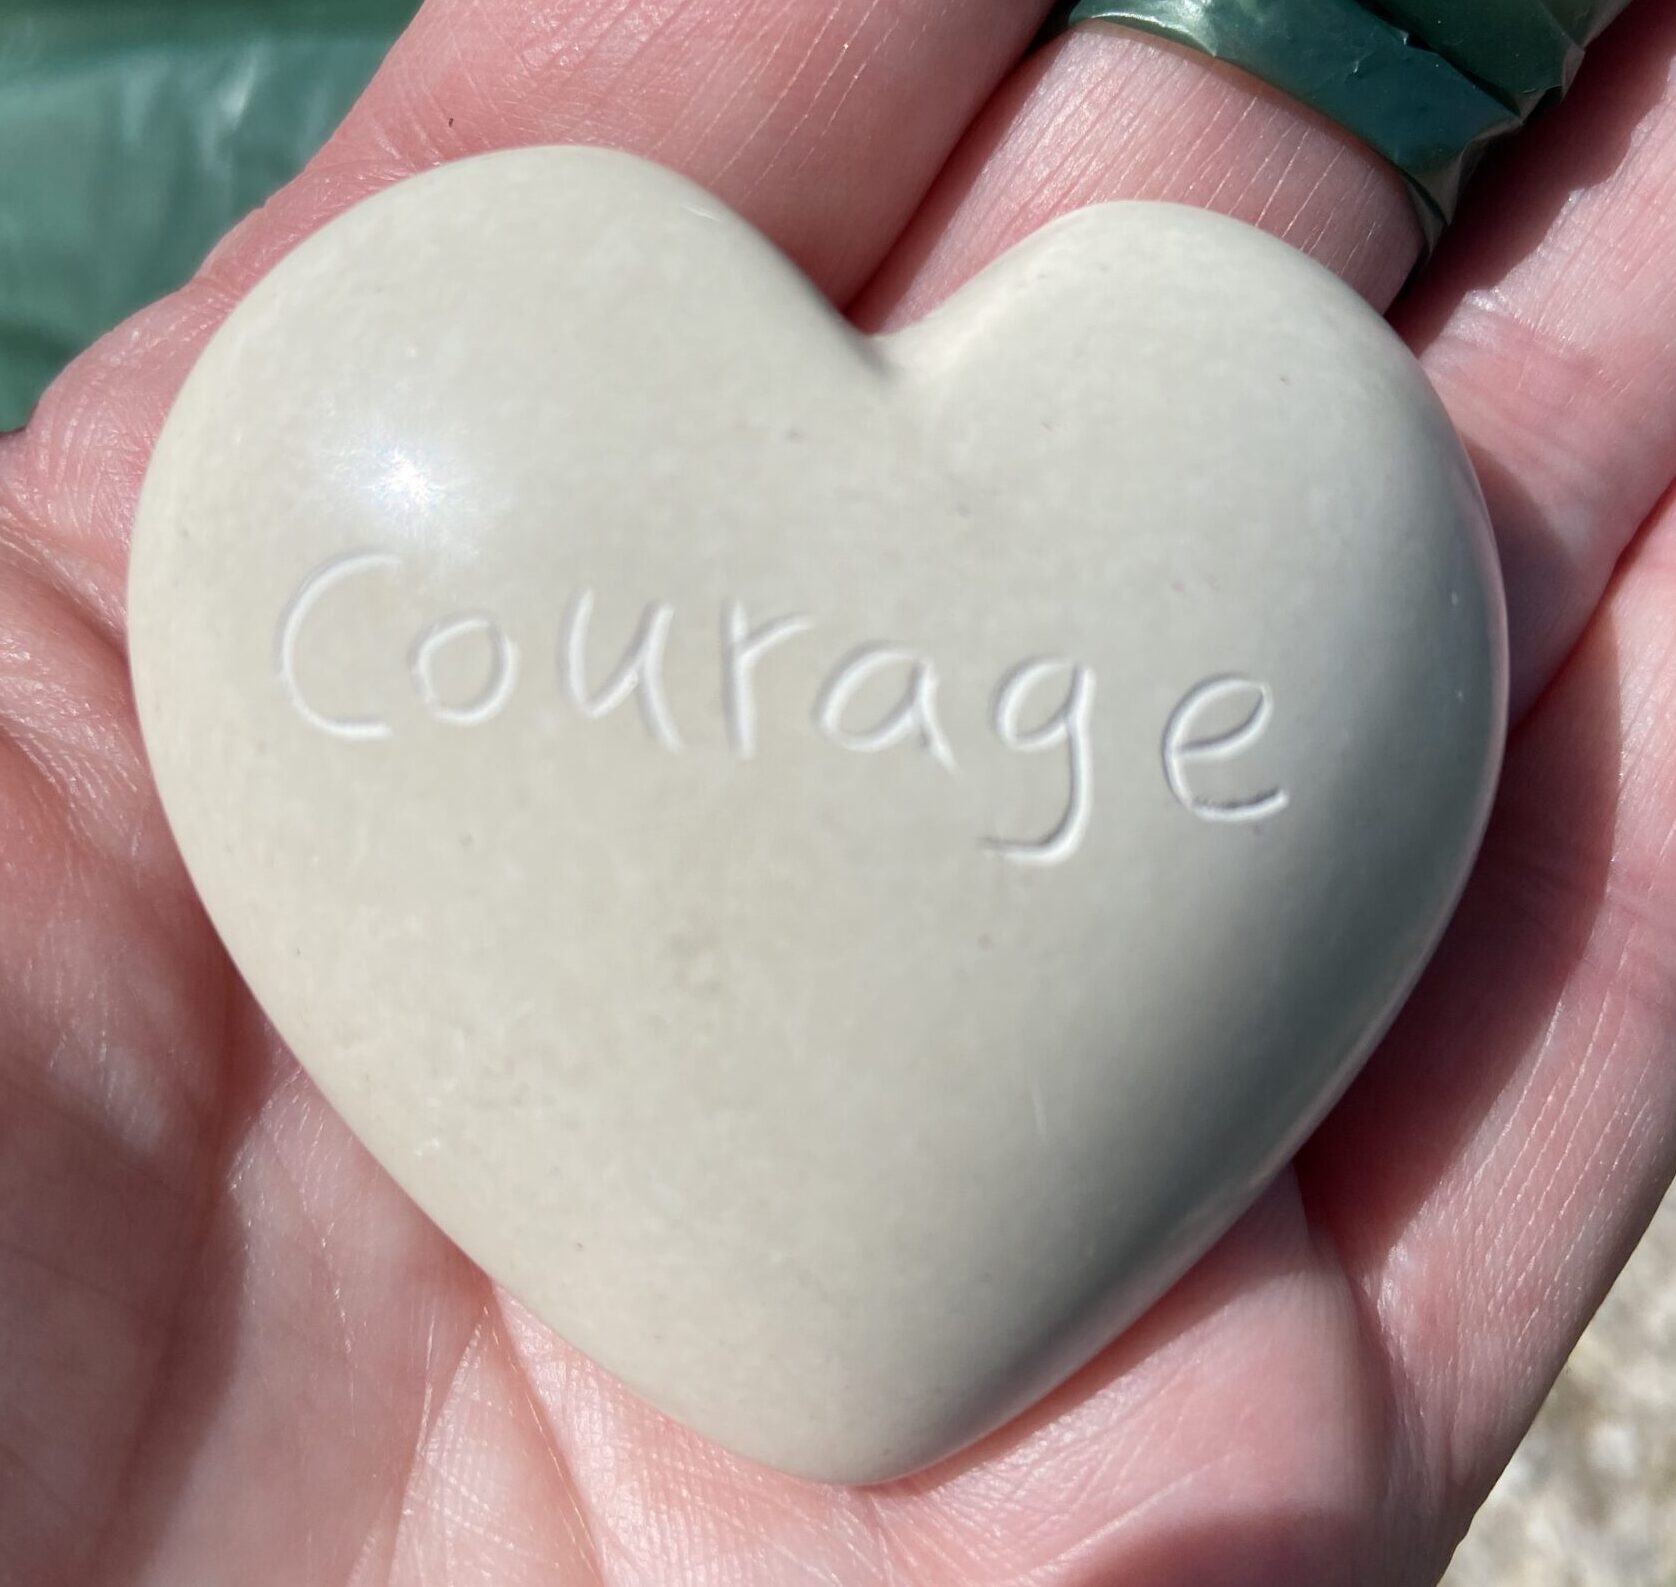 Heart-shaped stone with engraved "Courage"